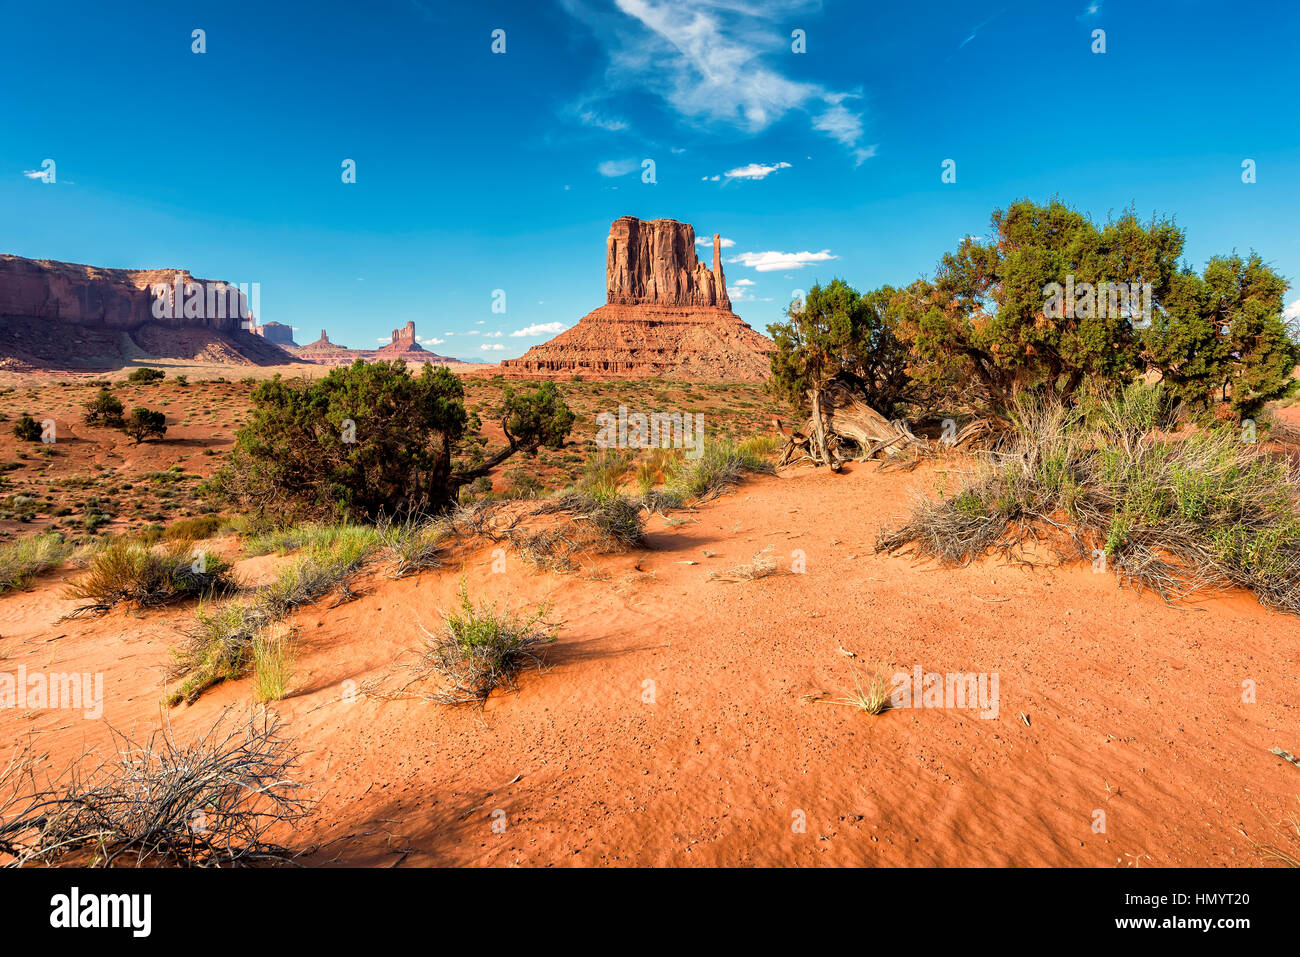 Monument Valley, Arizona. Banque D'Images